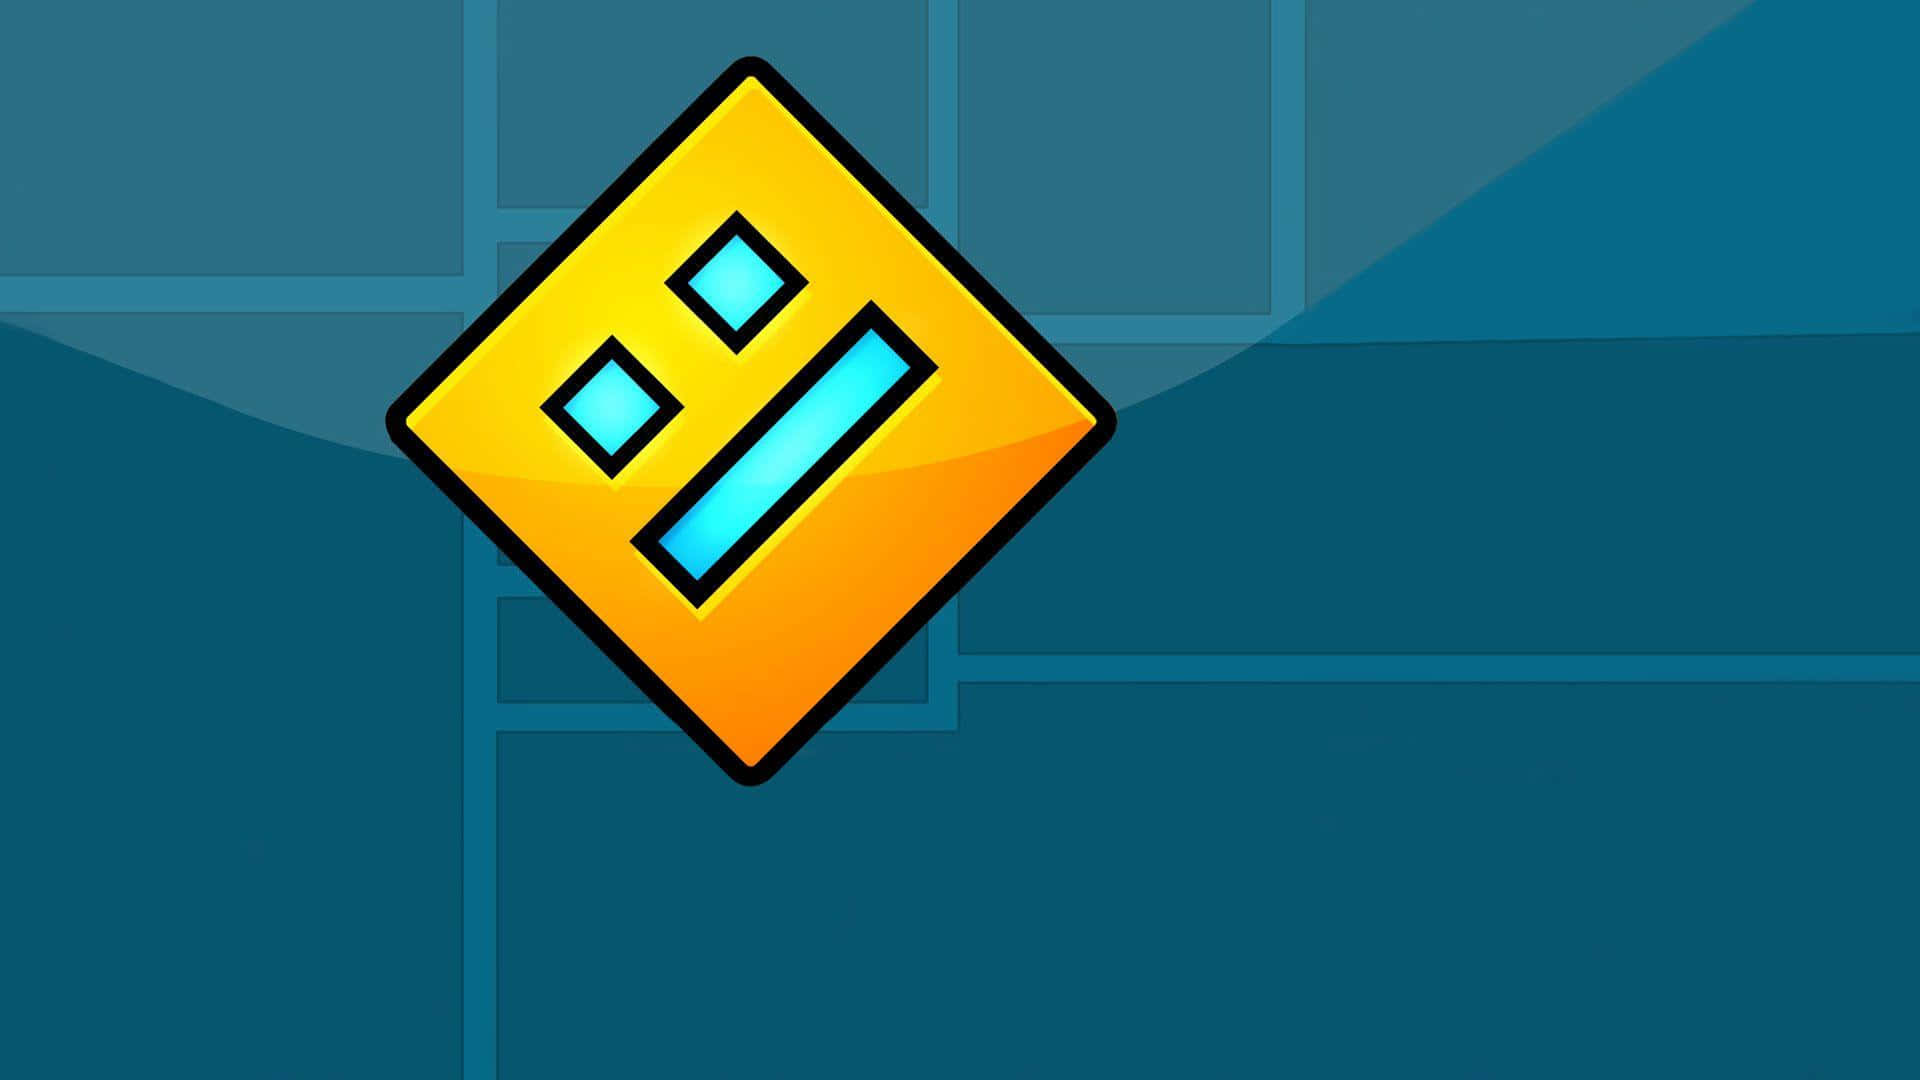 https://wallpapers.com/images/hd/geometry-dash-1920-x-1080-background-fbmycdolcq83hekg.jpg